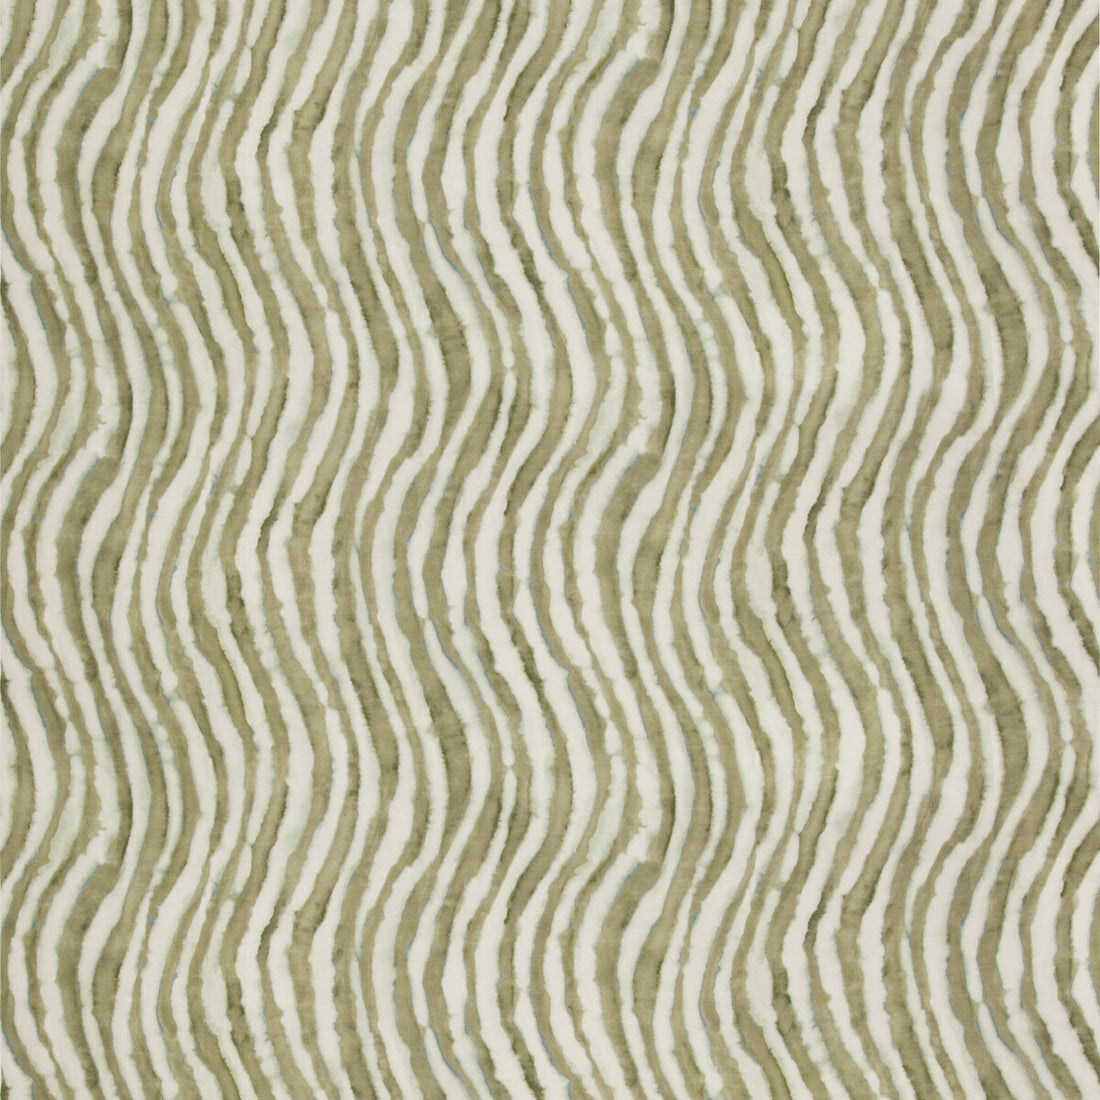 Makai fabric in pine color - pattern MAKAI.23.0 - by Kravet Couture in the Terrae Prints collection